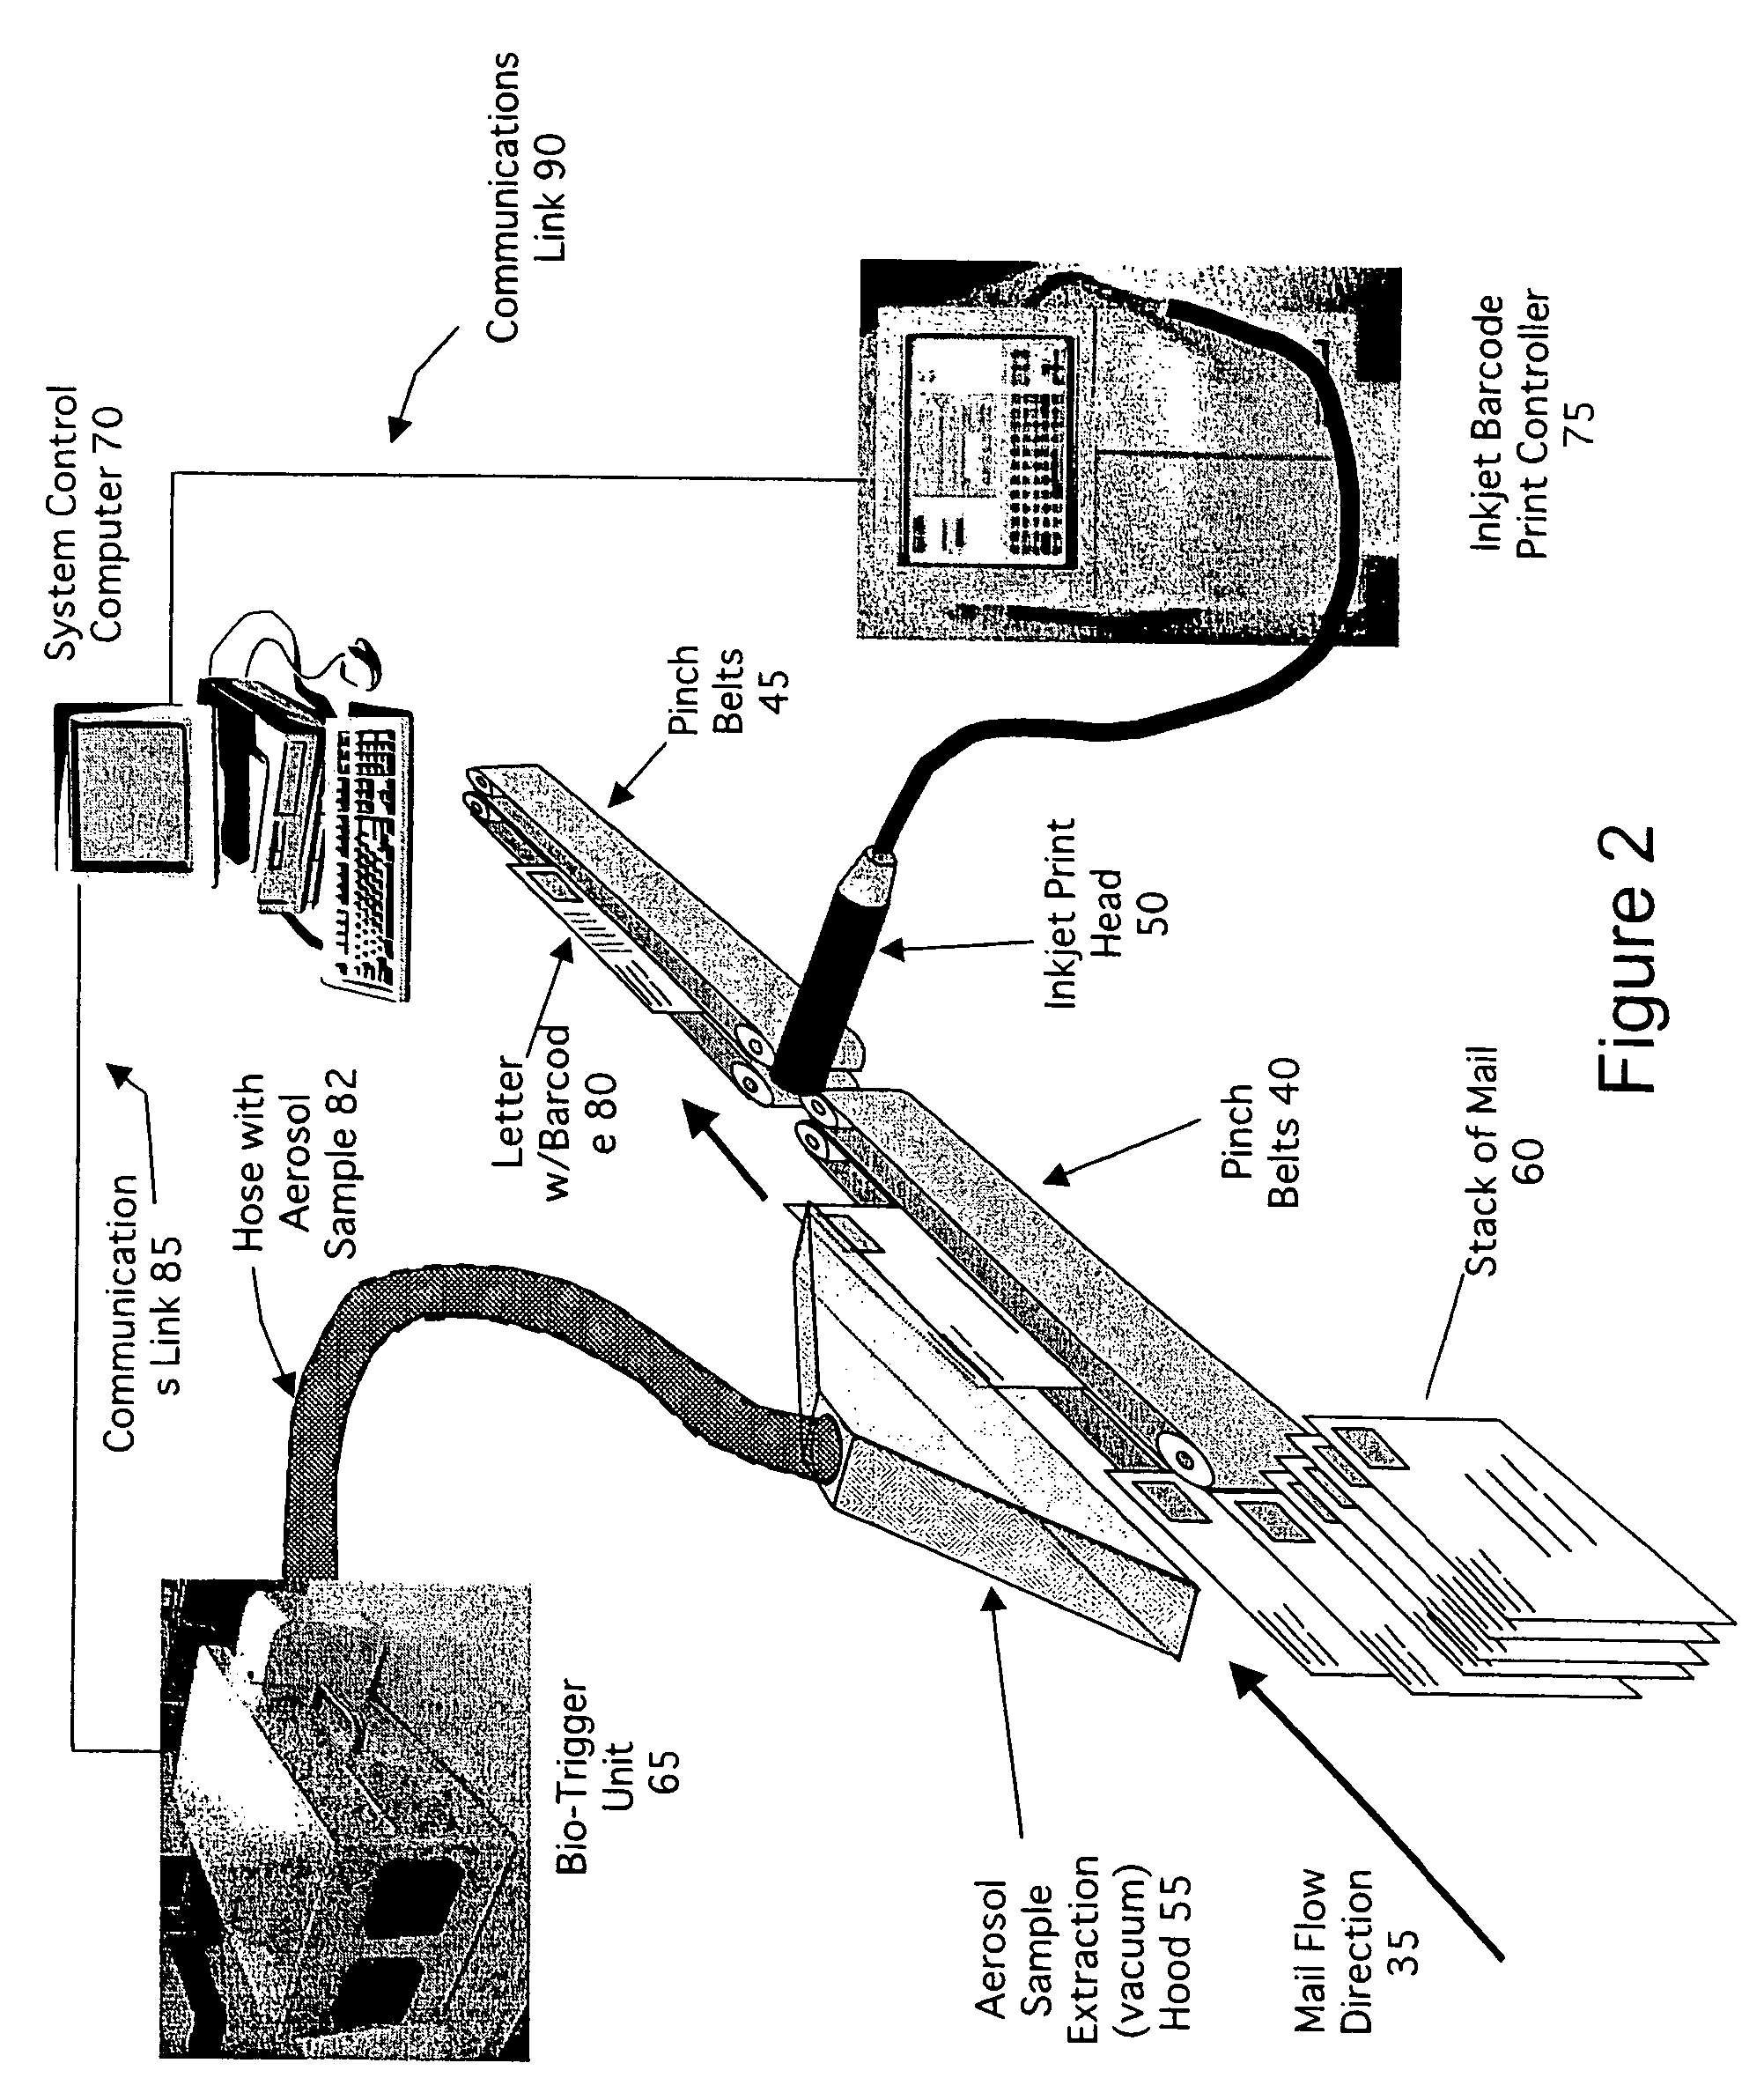 Chemical/biological hazard trigger with automatic mail piece tagging system and method